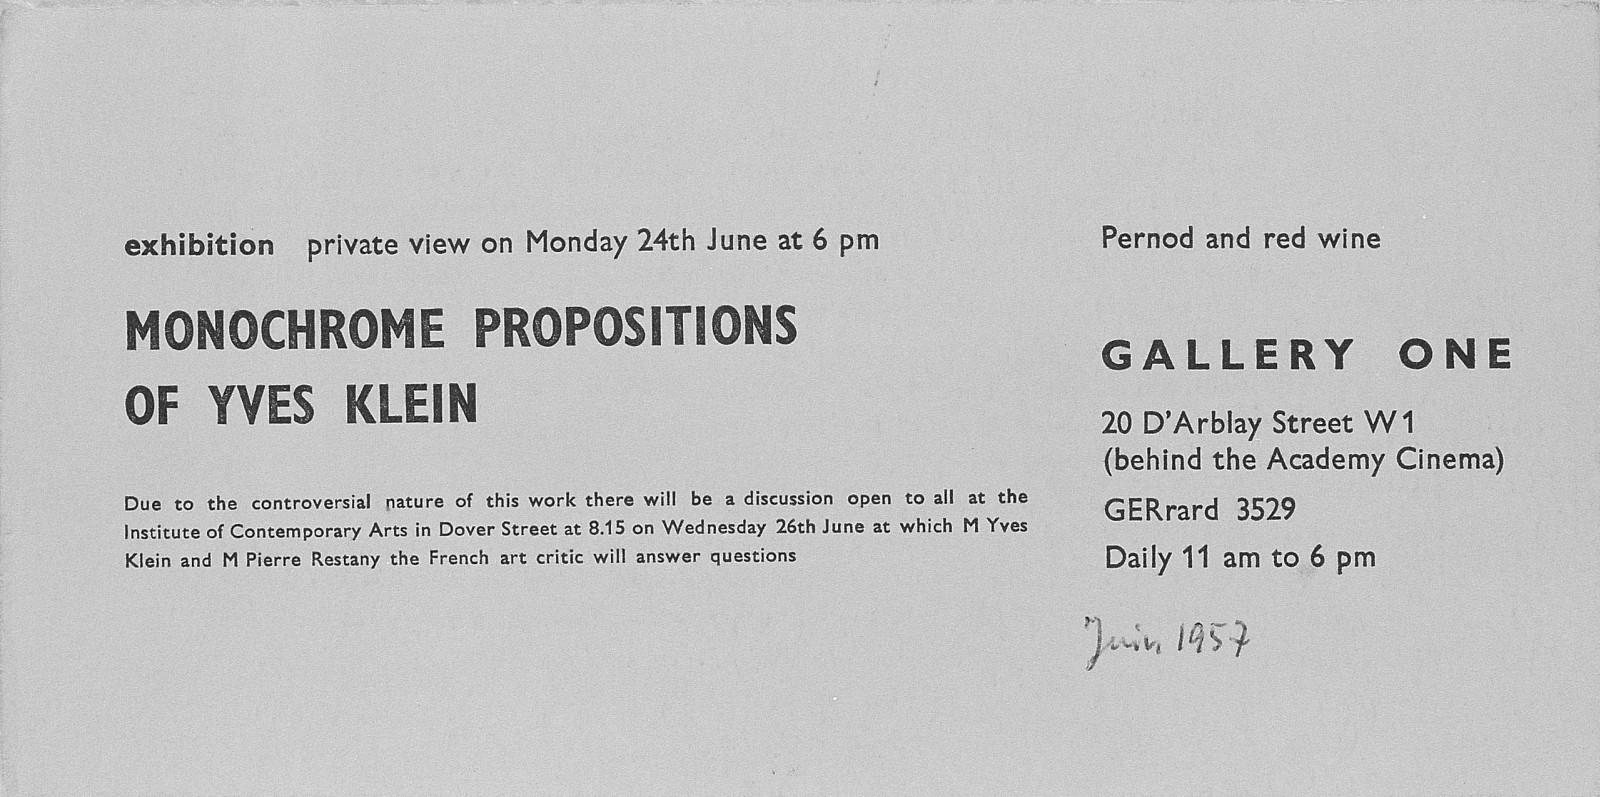 Invitation card for the exhibition "Monochrome Propositions of Yves Klein », Gallery One, London, 1957